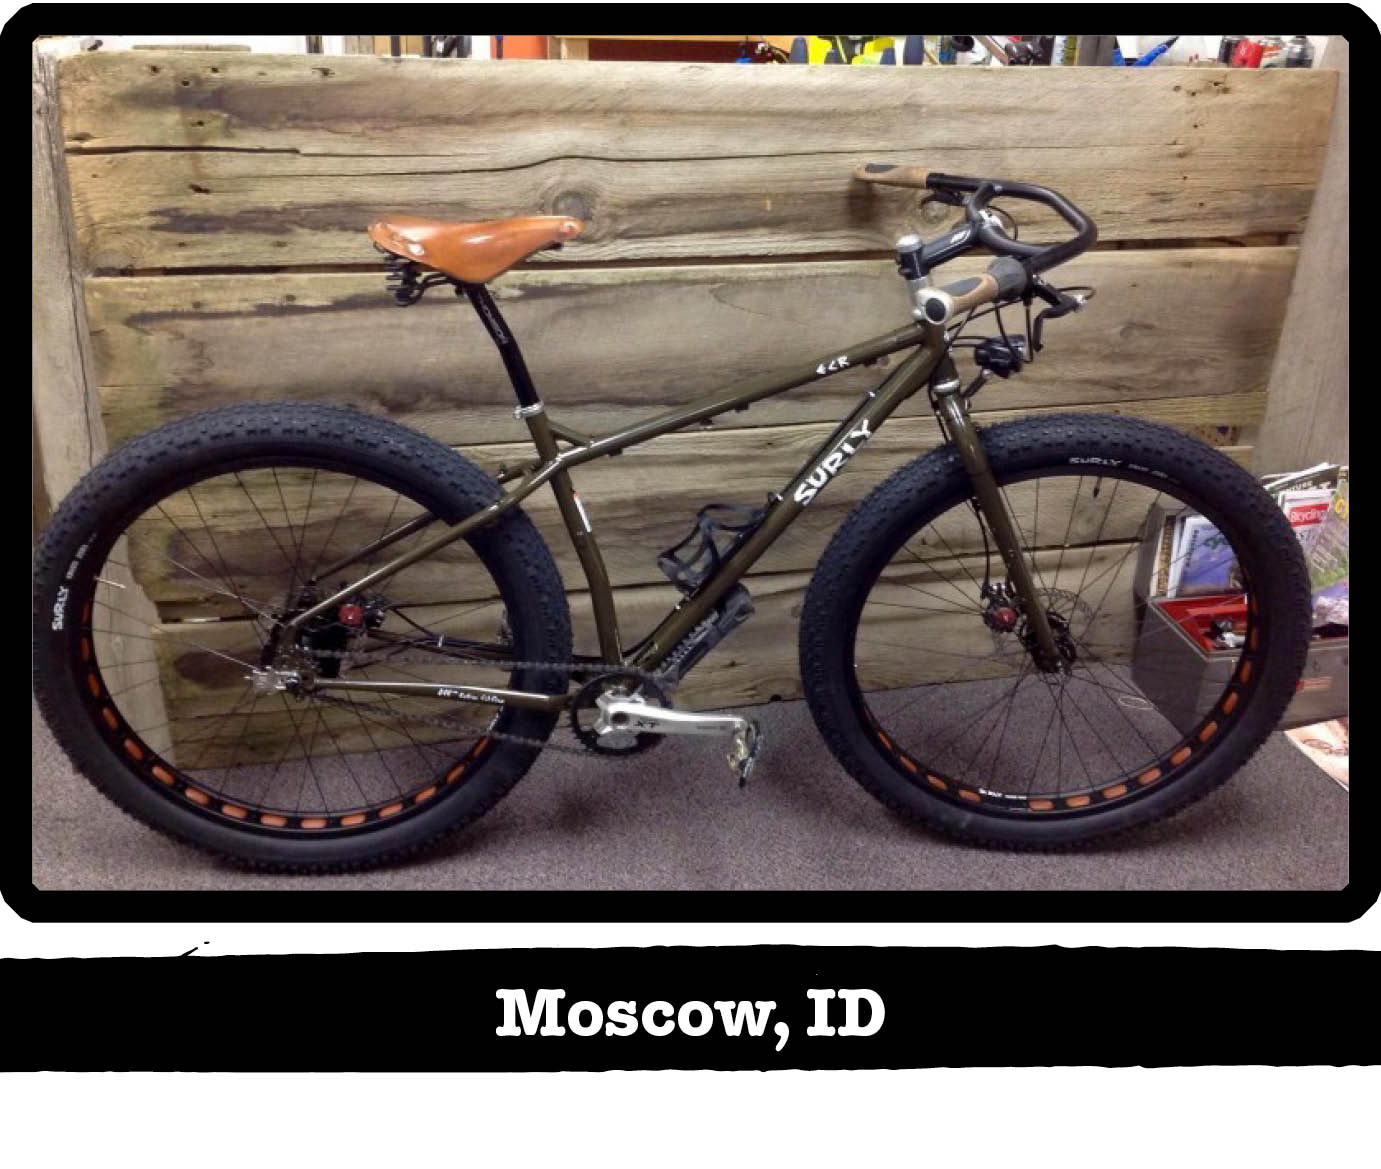 Right side view of a Surly ECR fat bike, olive drab, against a wood wall - Moscow, ID tag below image